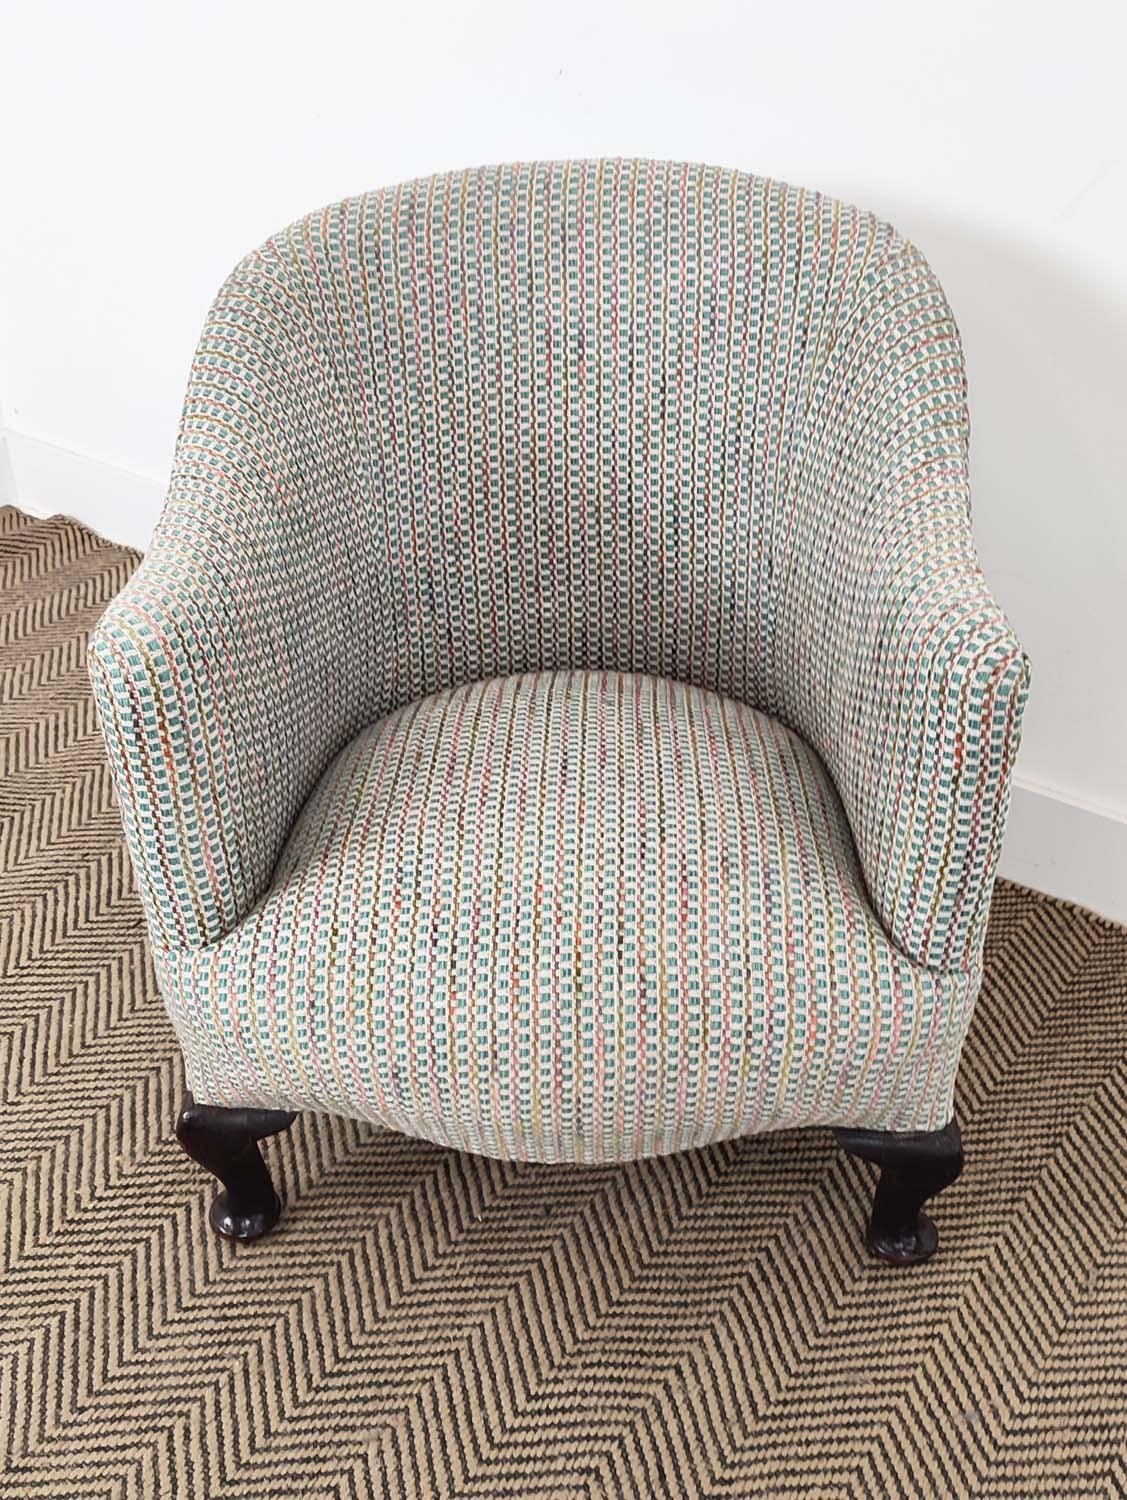 TUB CHAIR, Edwardian mahogany in patterned chenille, 71cm H x 58cm. - Image 6 of 12